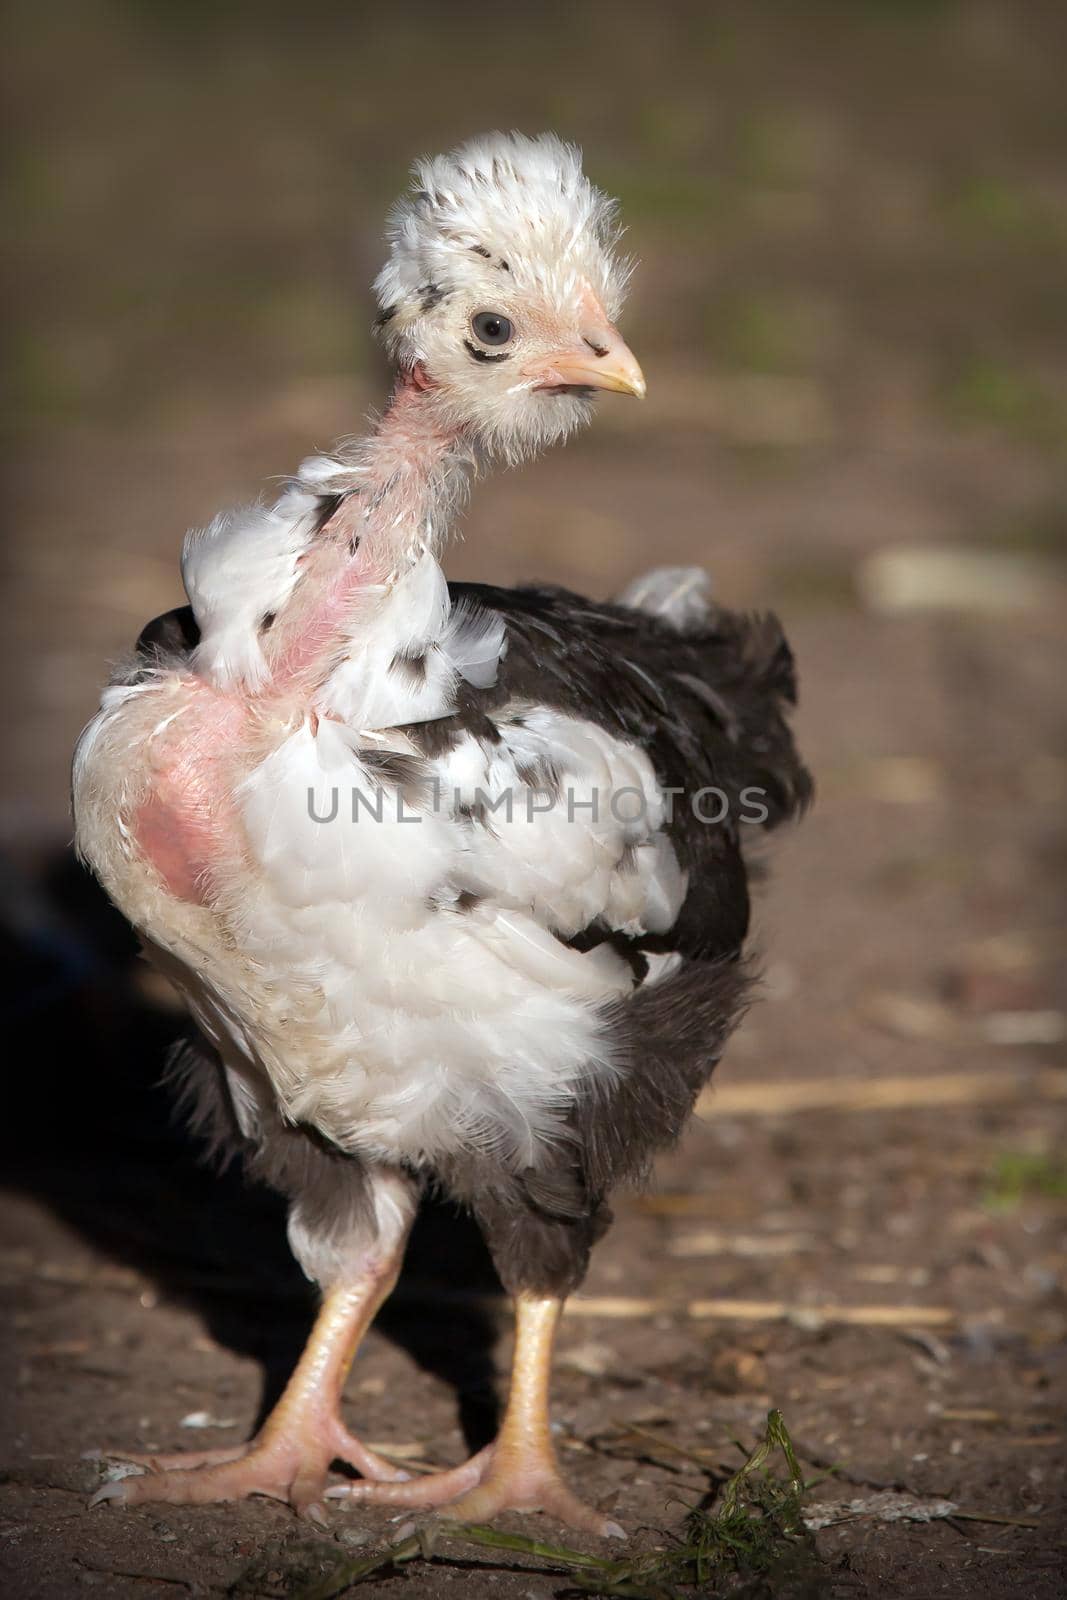 Naked neck white and black spotty chicken by Lincikas